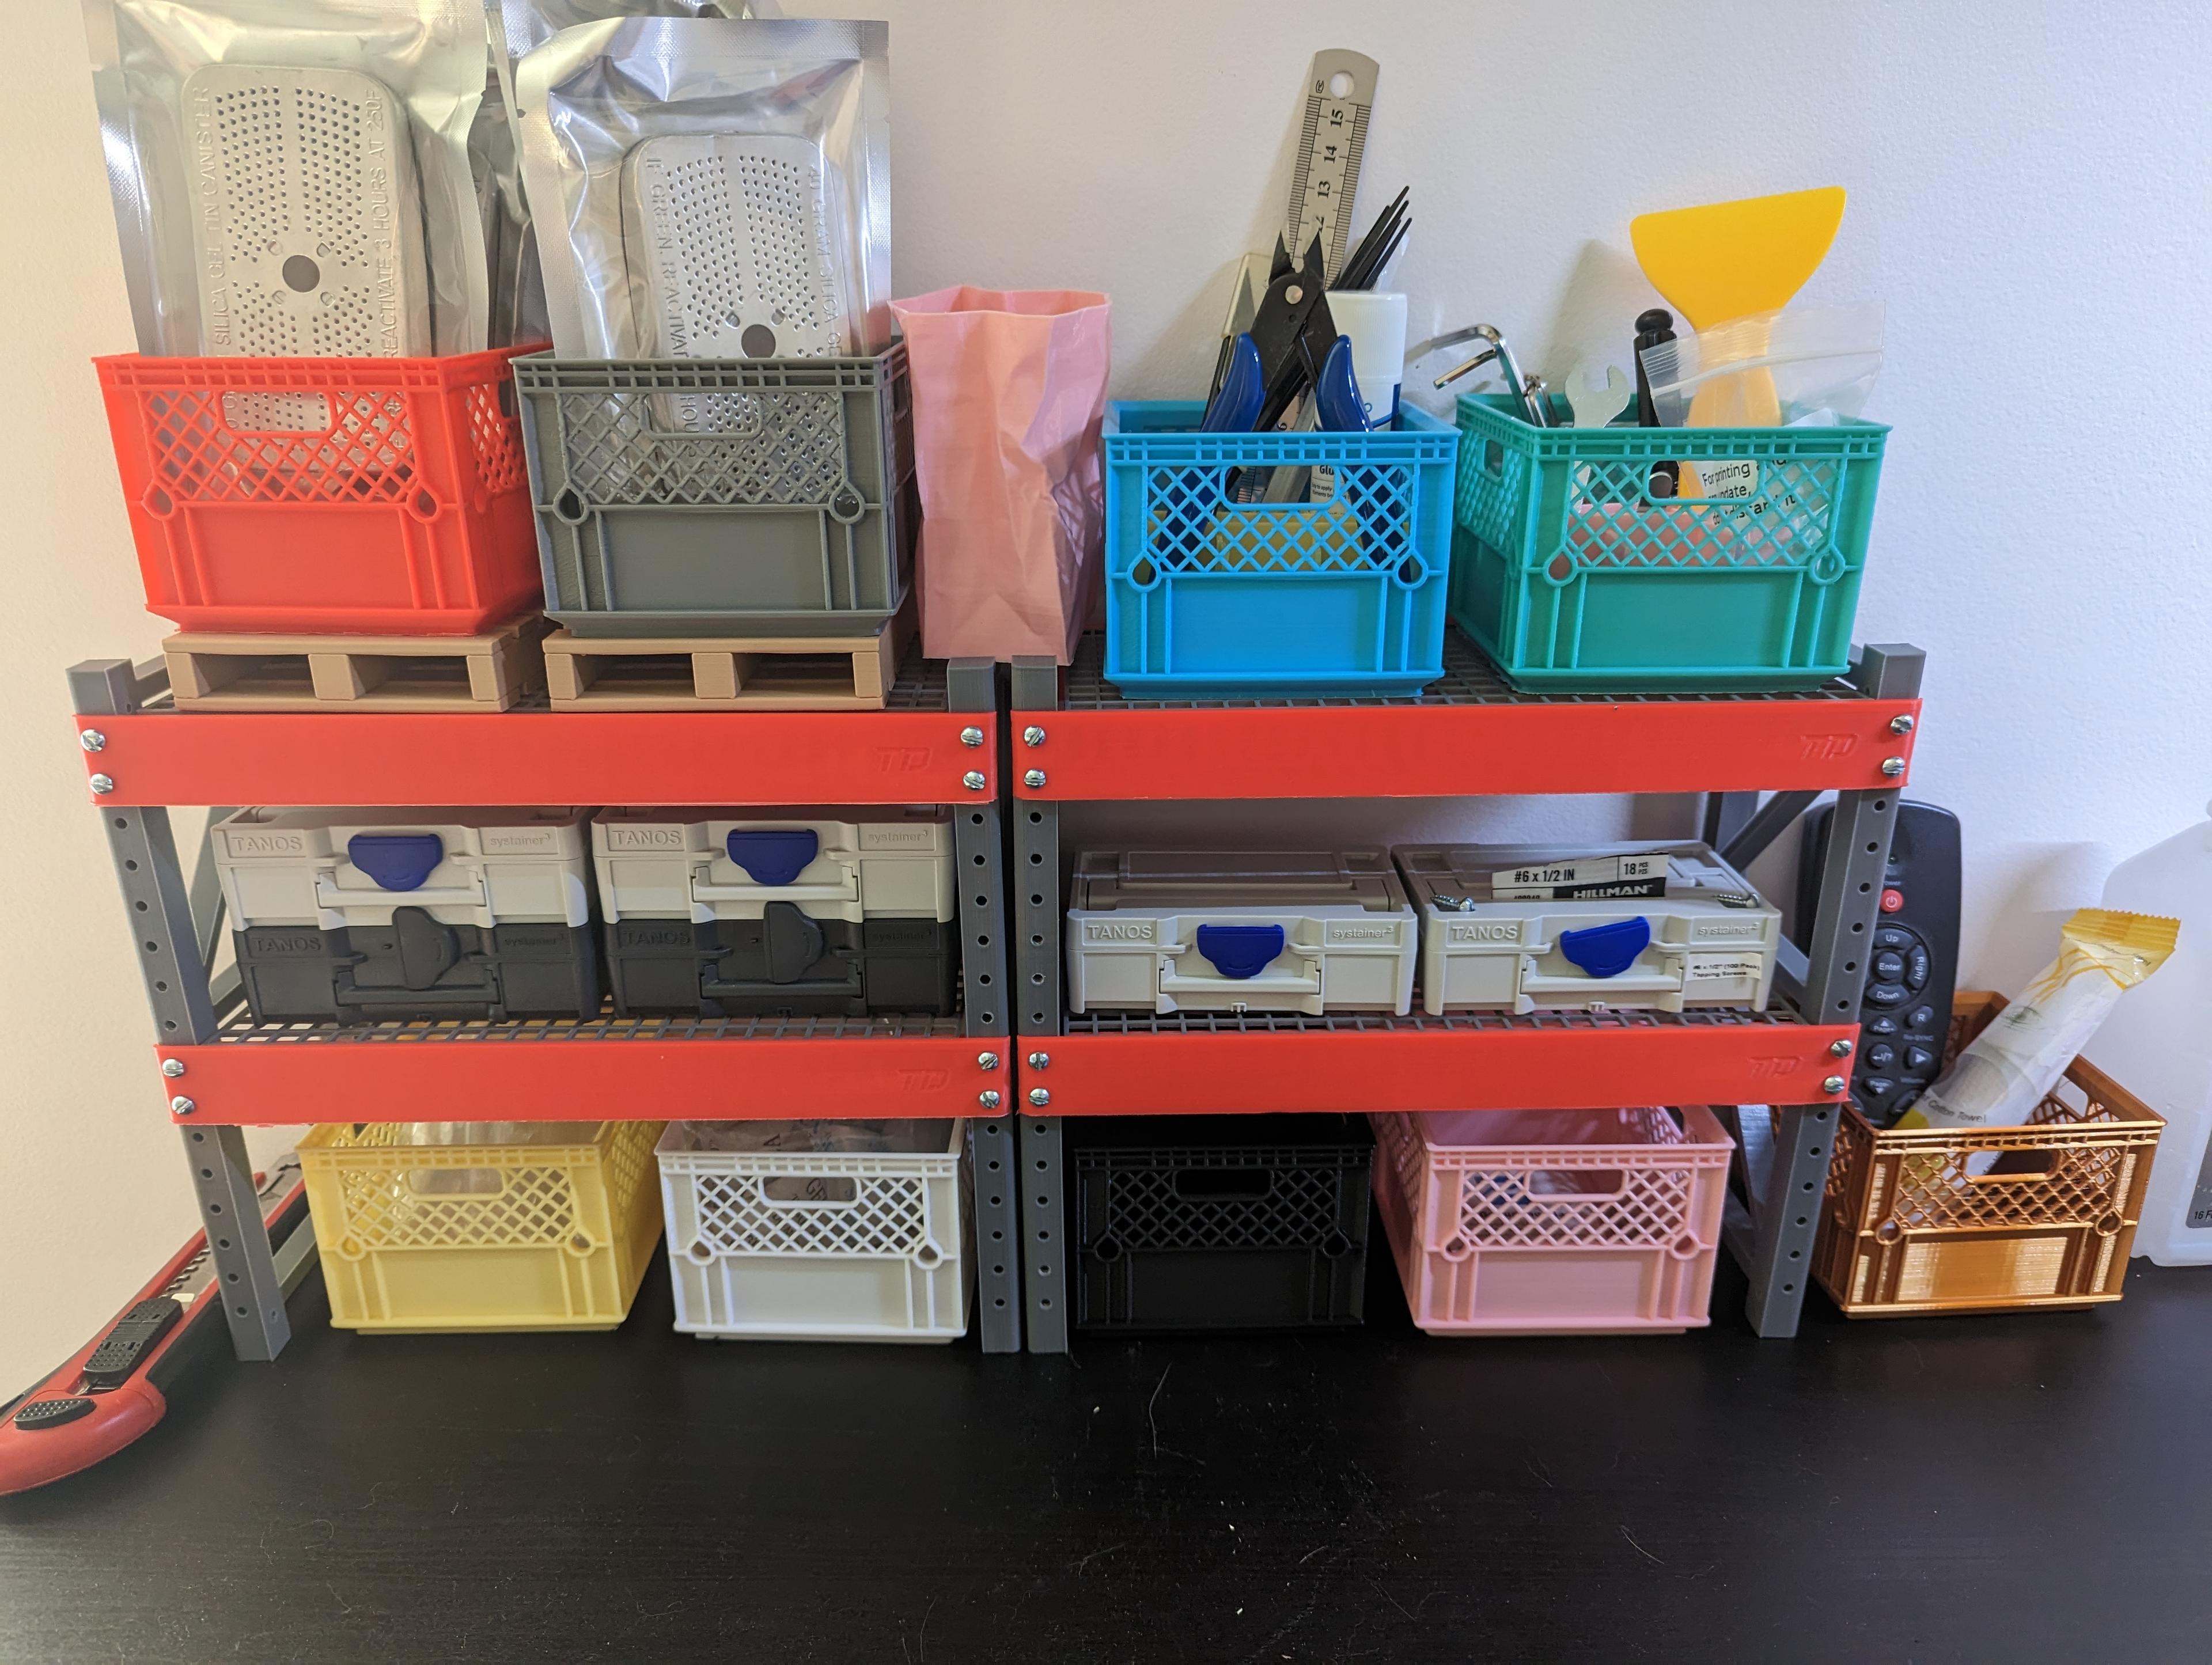 Post-It Pallet Storage Rack - Scaled up to 125% for my Systainers and "penholder crate box" by PLANL3D. - 3d model